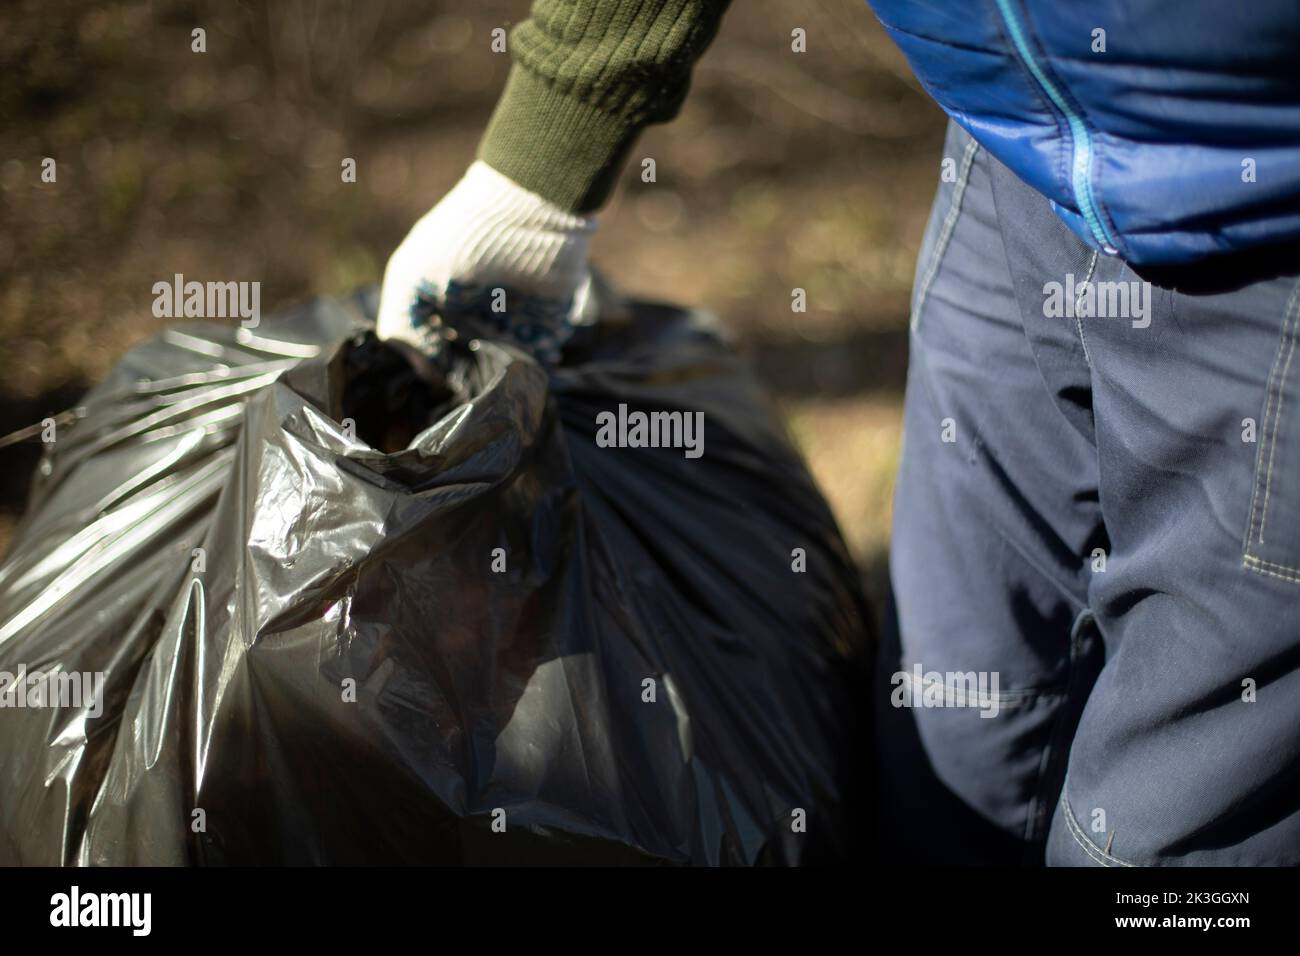 Garbage collection in bag. People clean up yard. Harvesting leaves in park. Stock Photo